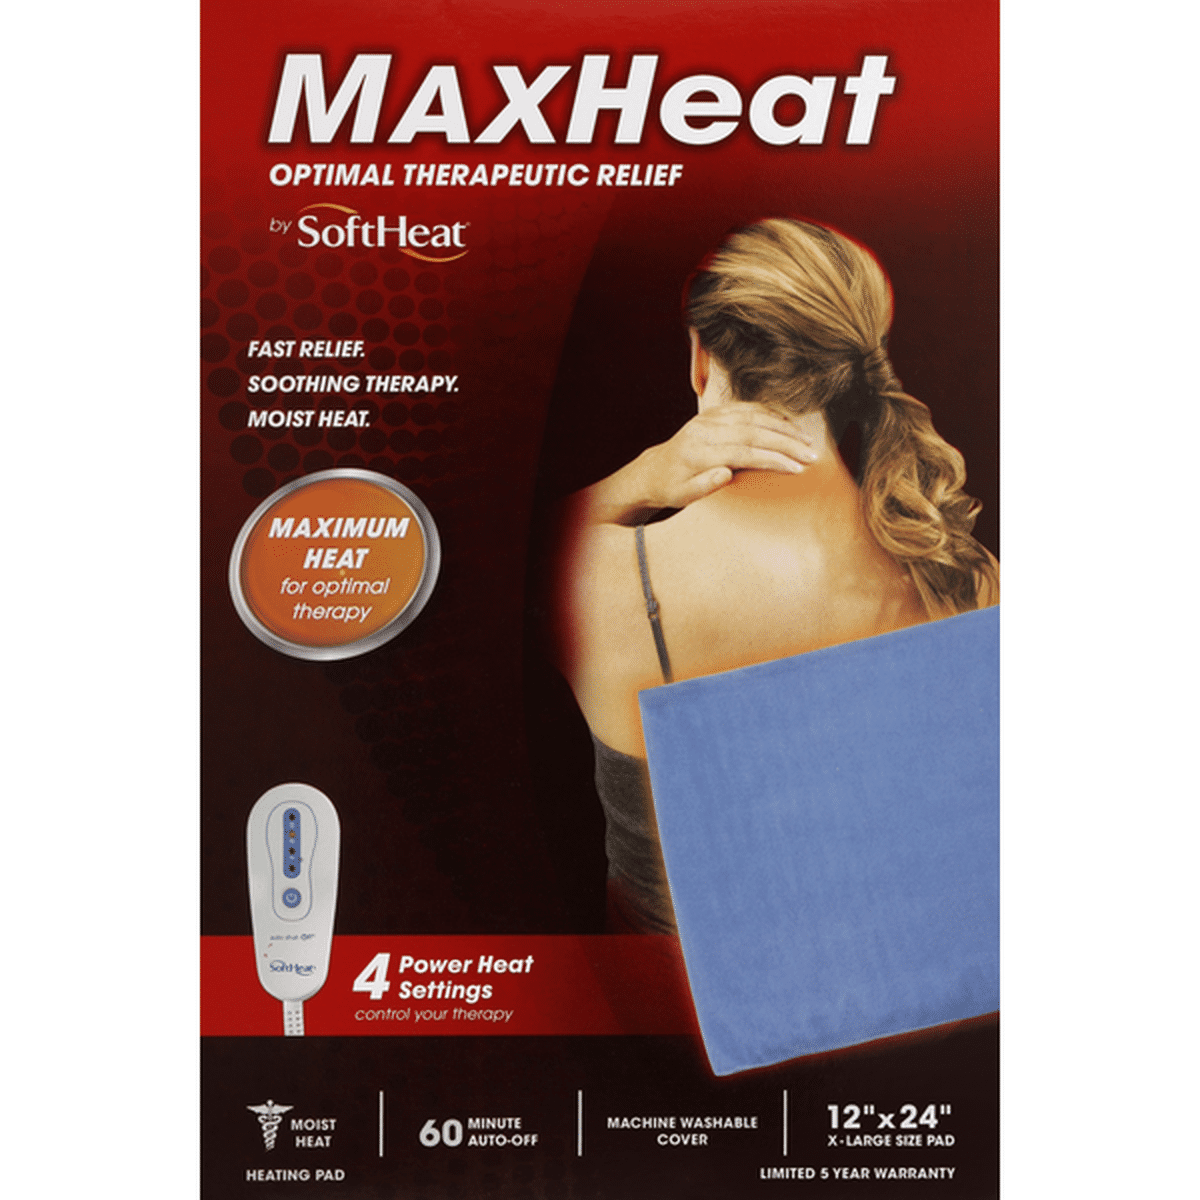 Heating Pad with Removable Cover (12” x 24”)